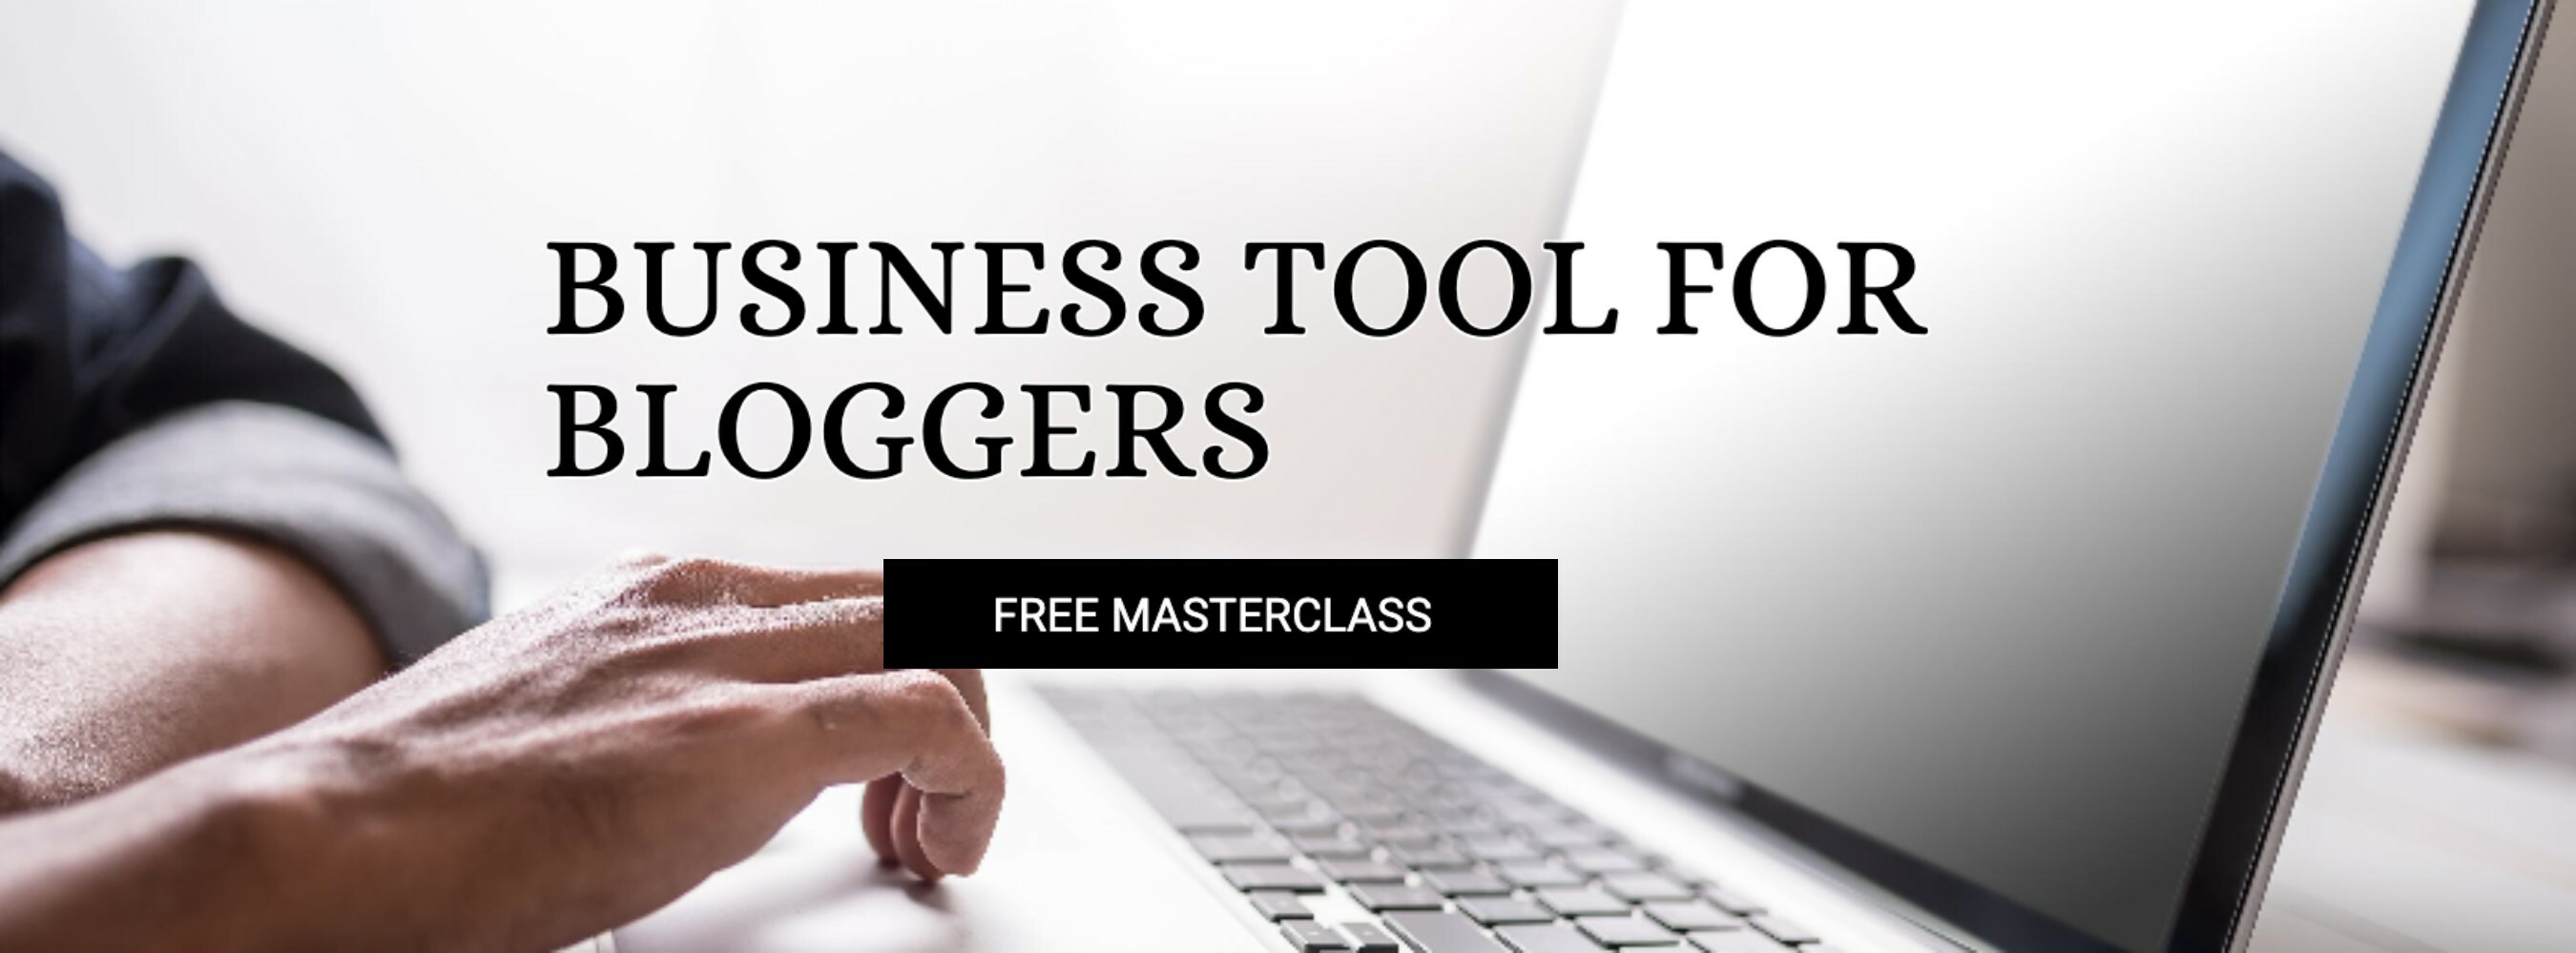 Business masterclass for bloggers template